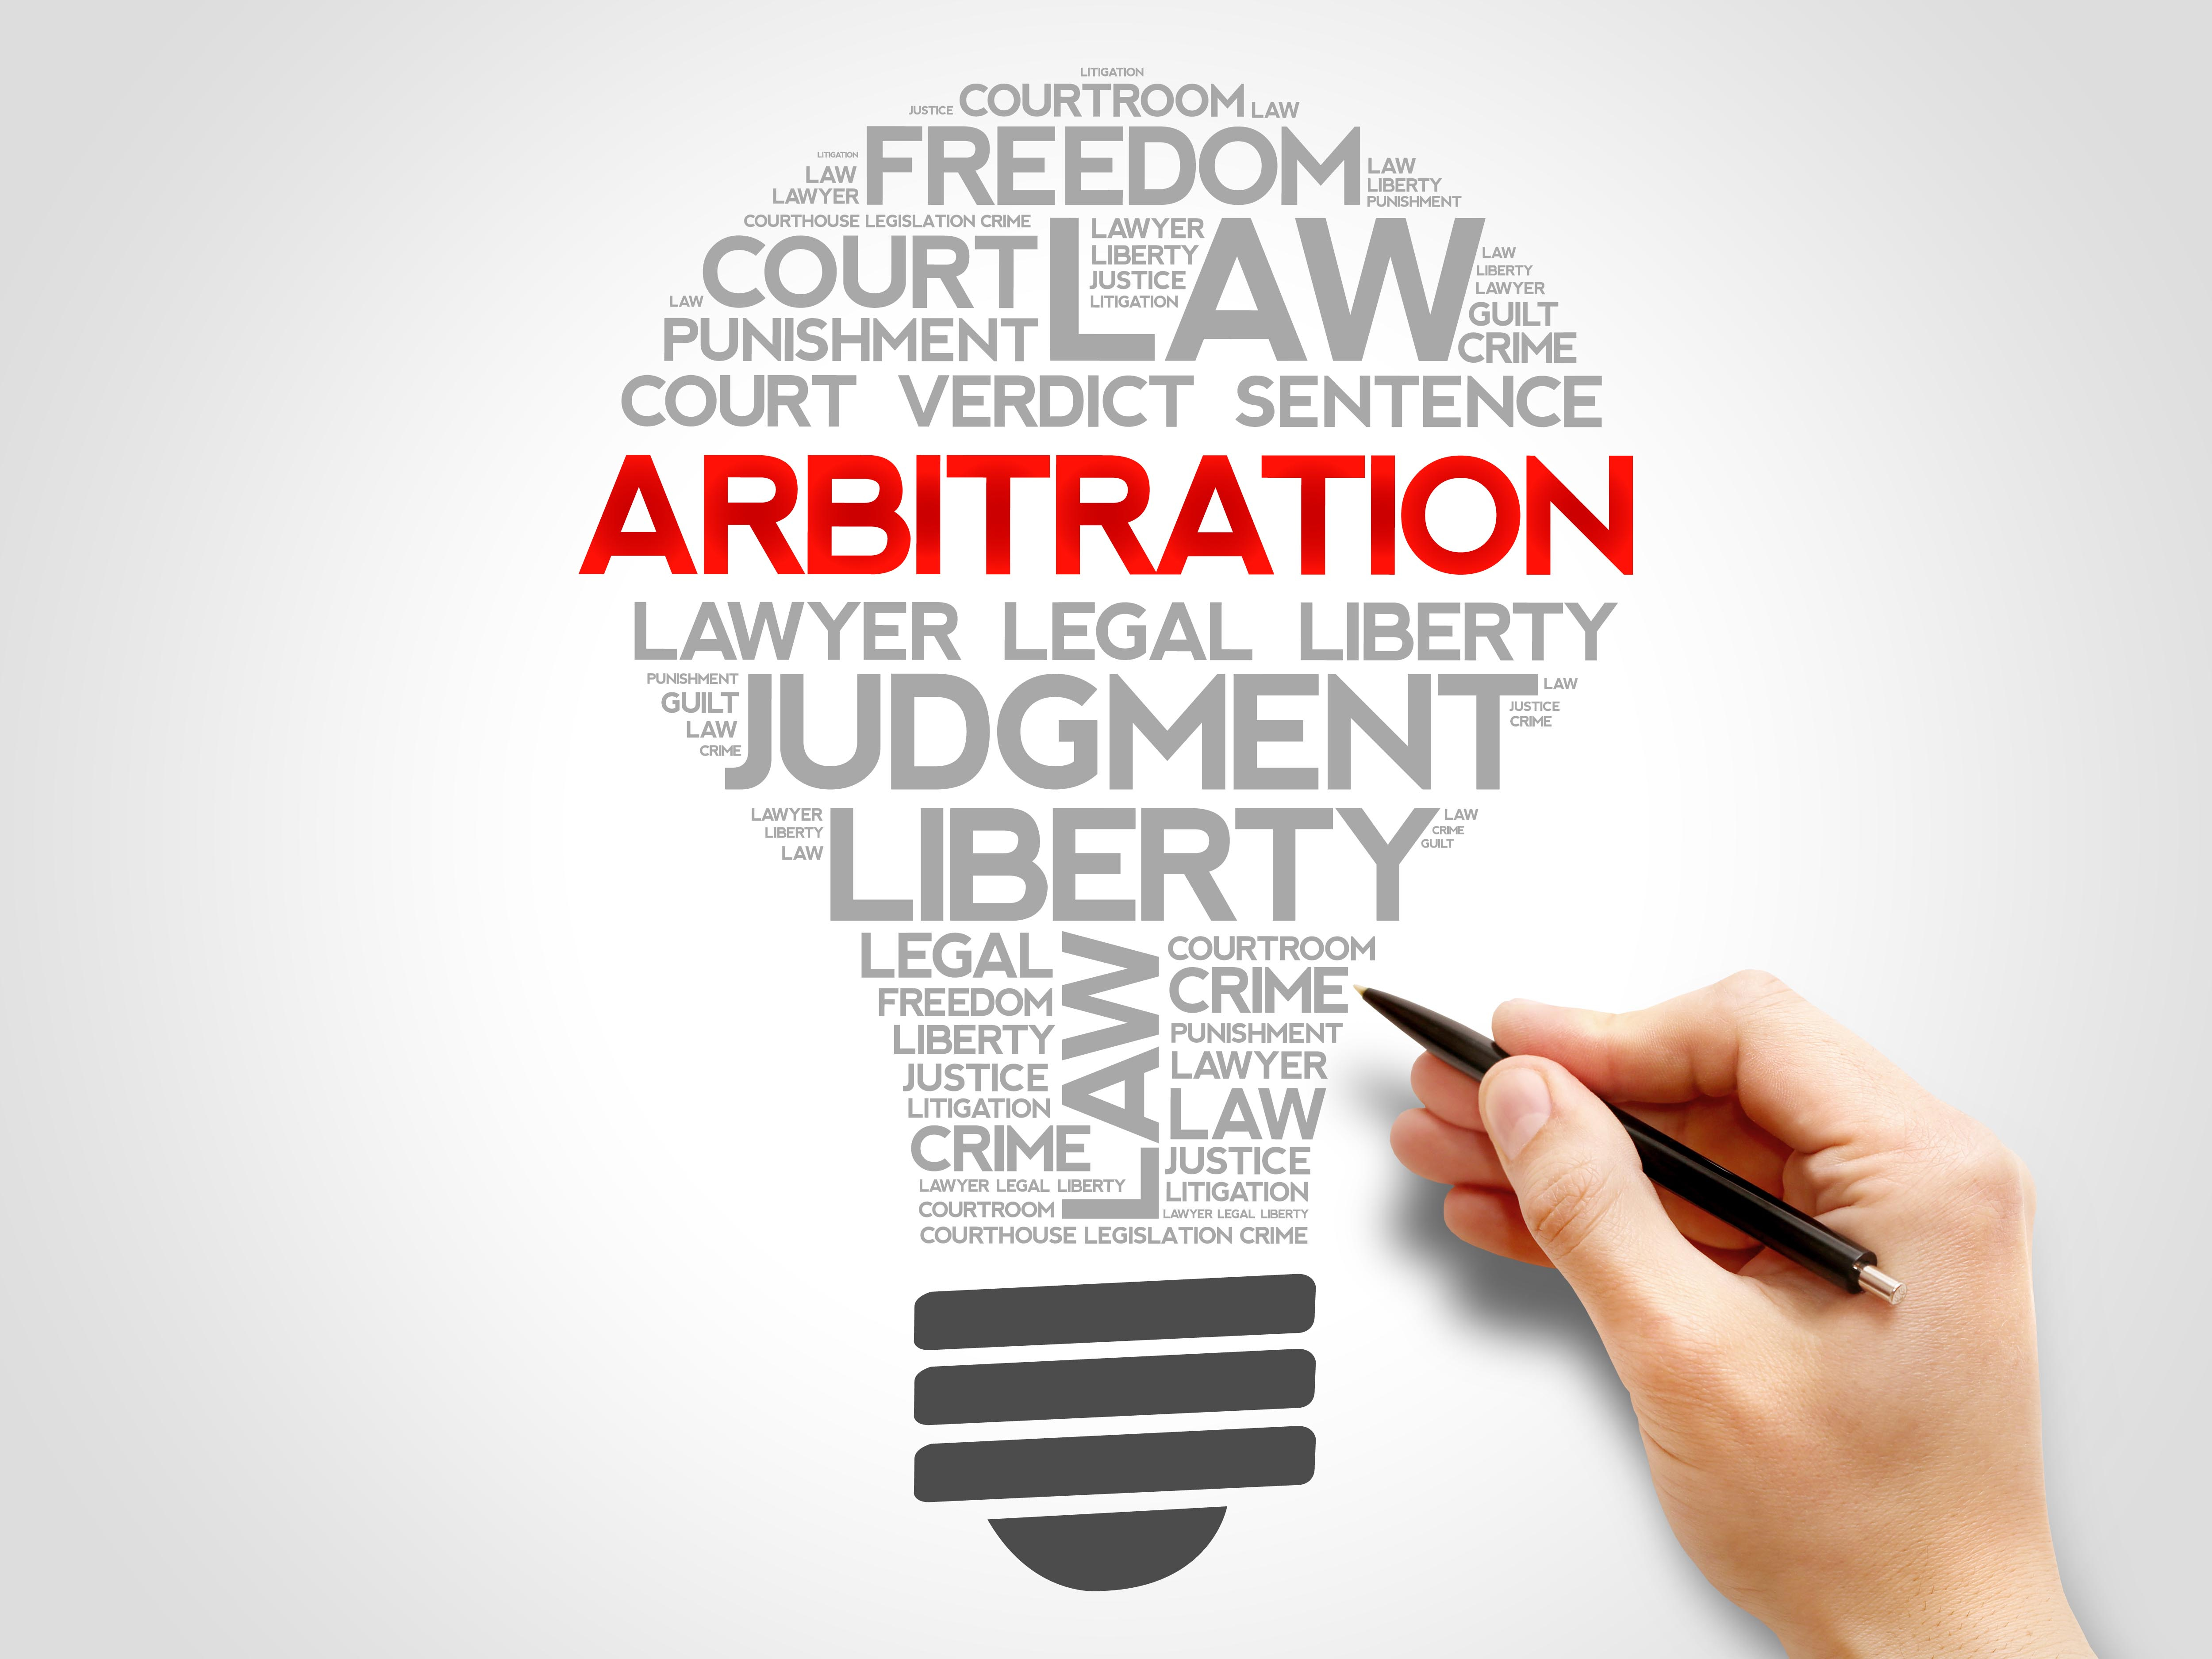 Agreement To Arbitrate When Is An Arbitration Agreement Not An Agreement To Arbitrate